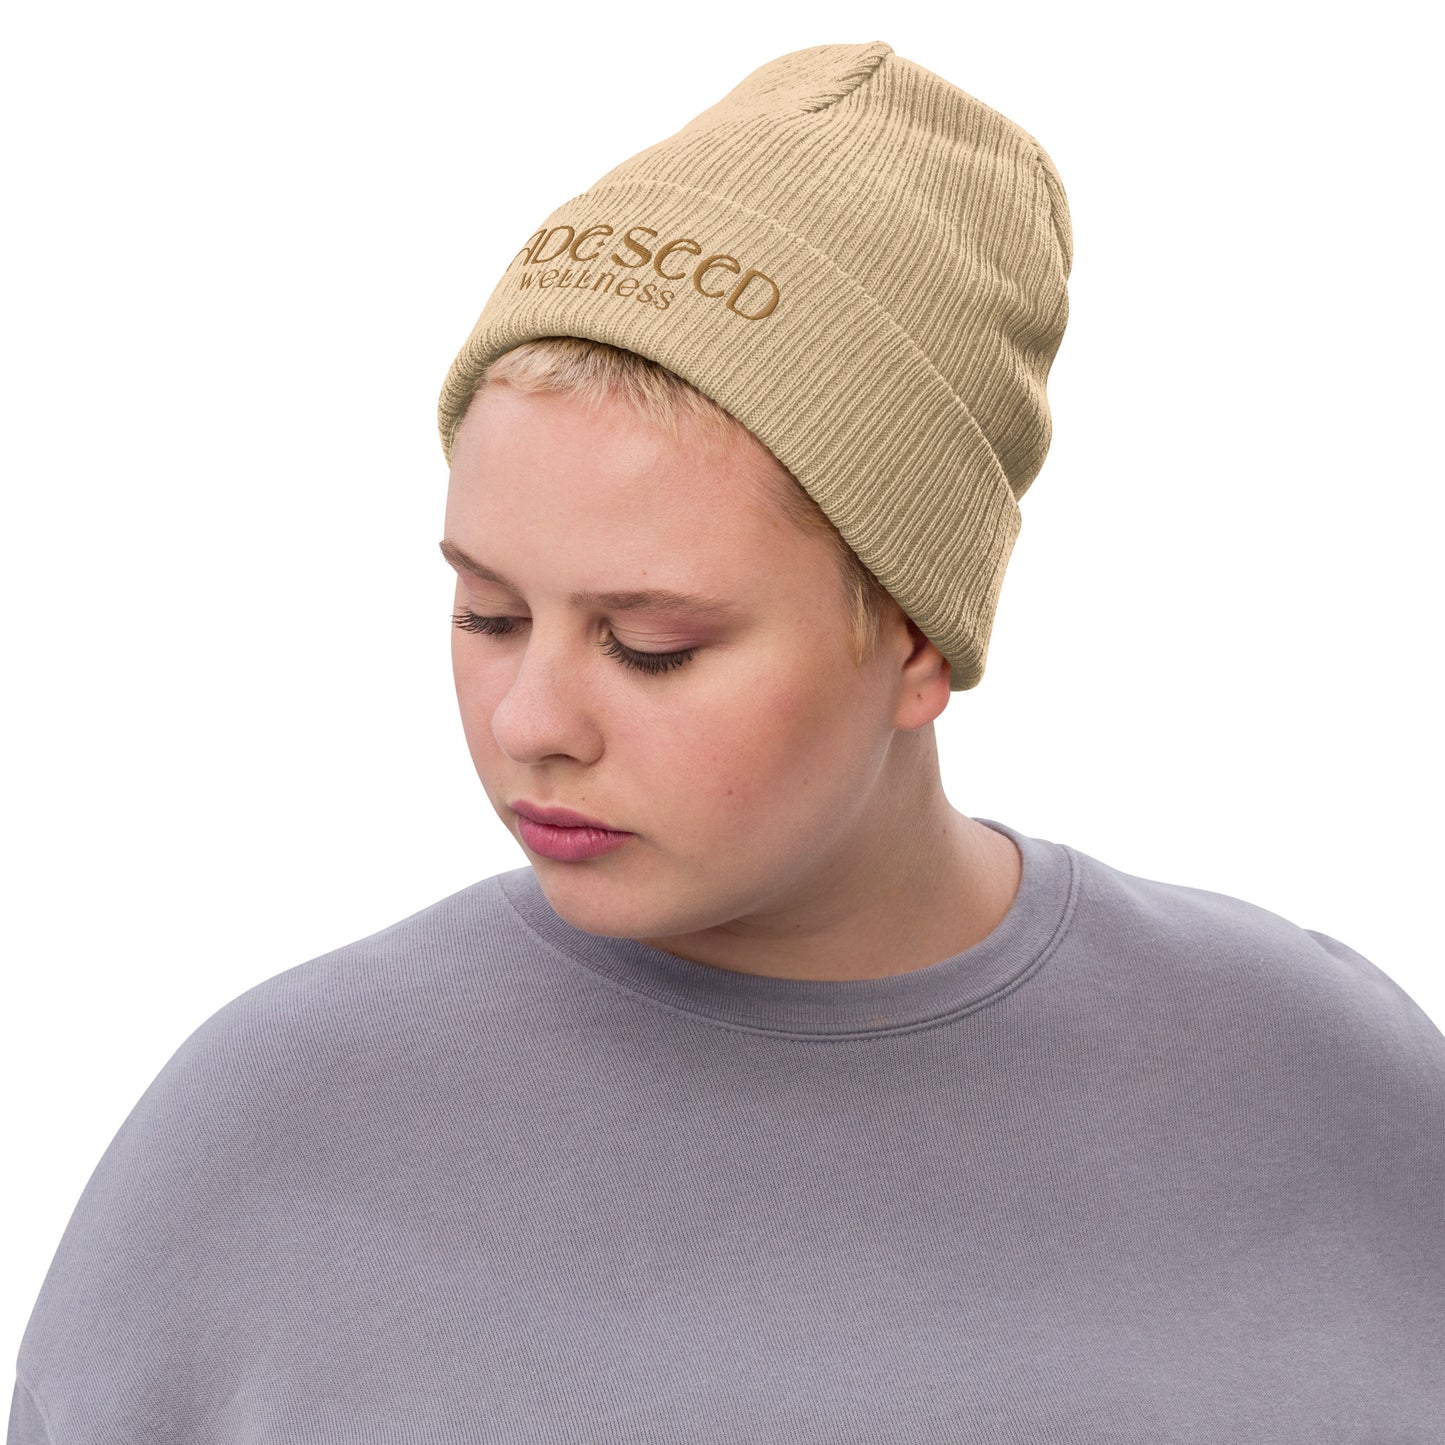 Jade Seed Wellness Recycle Eco Ribbed knit beanie